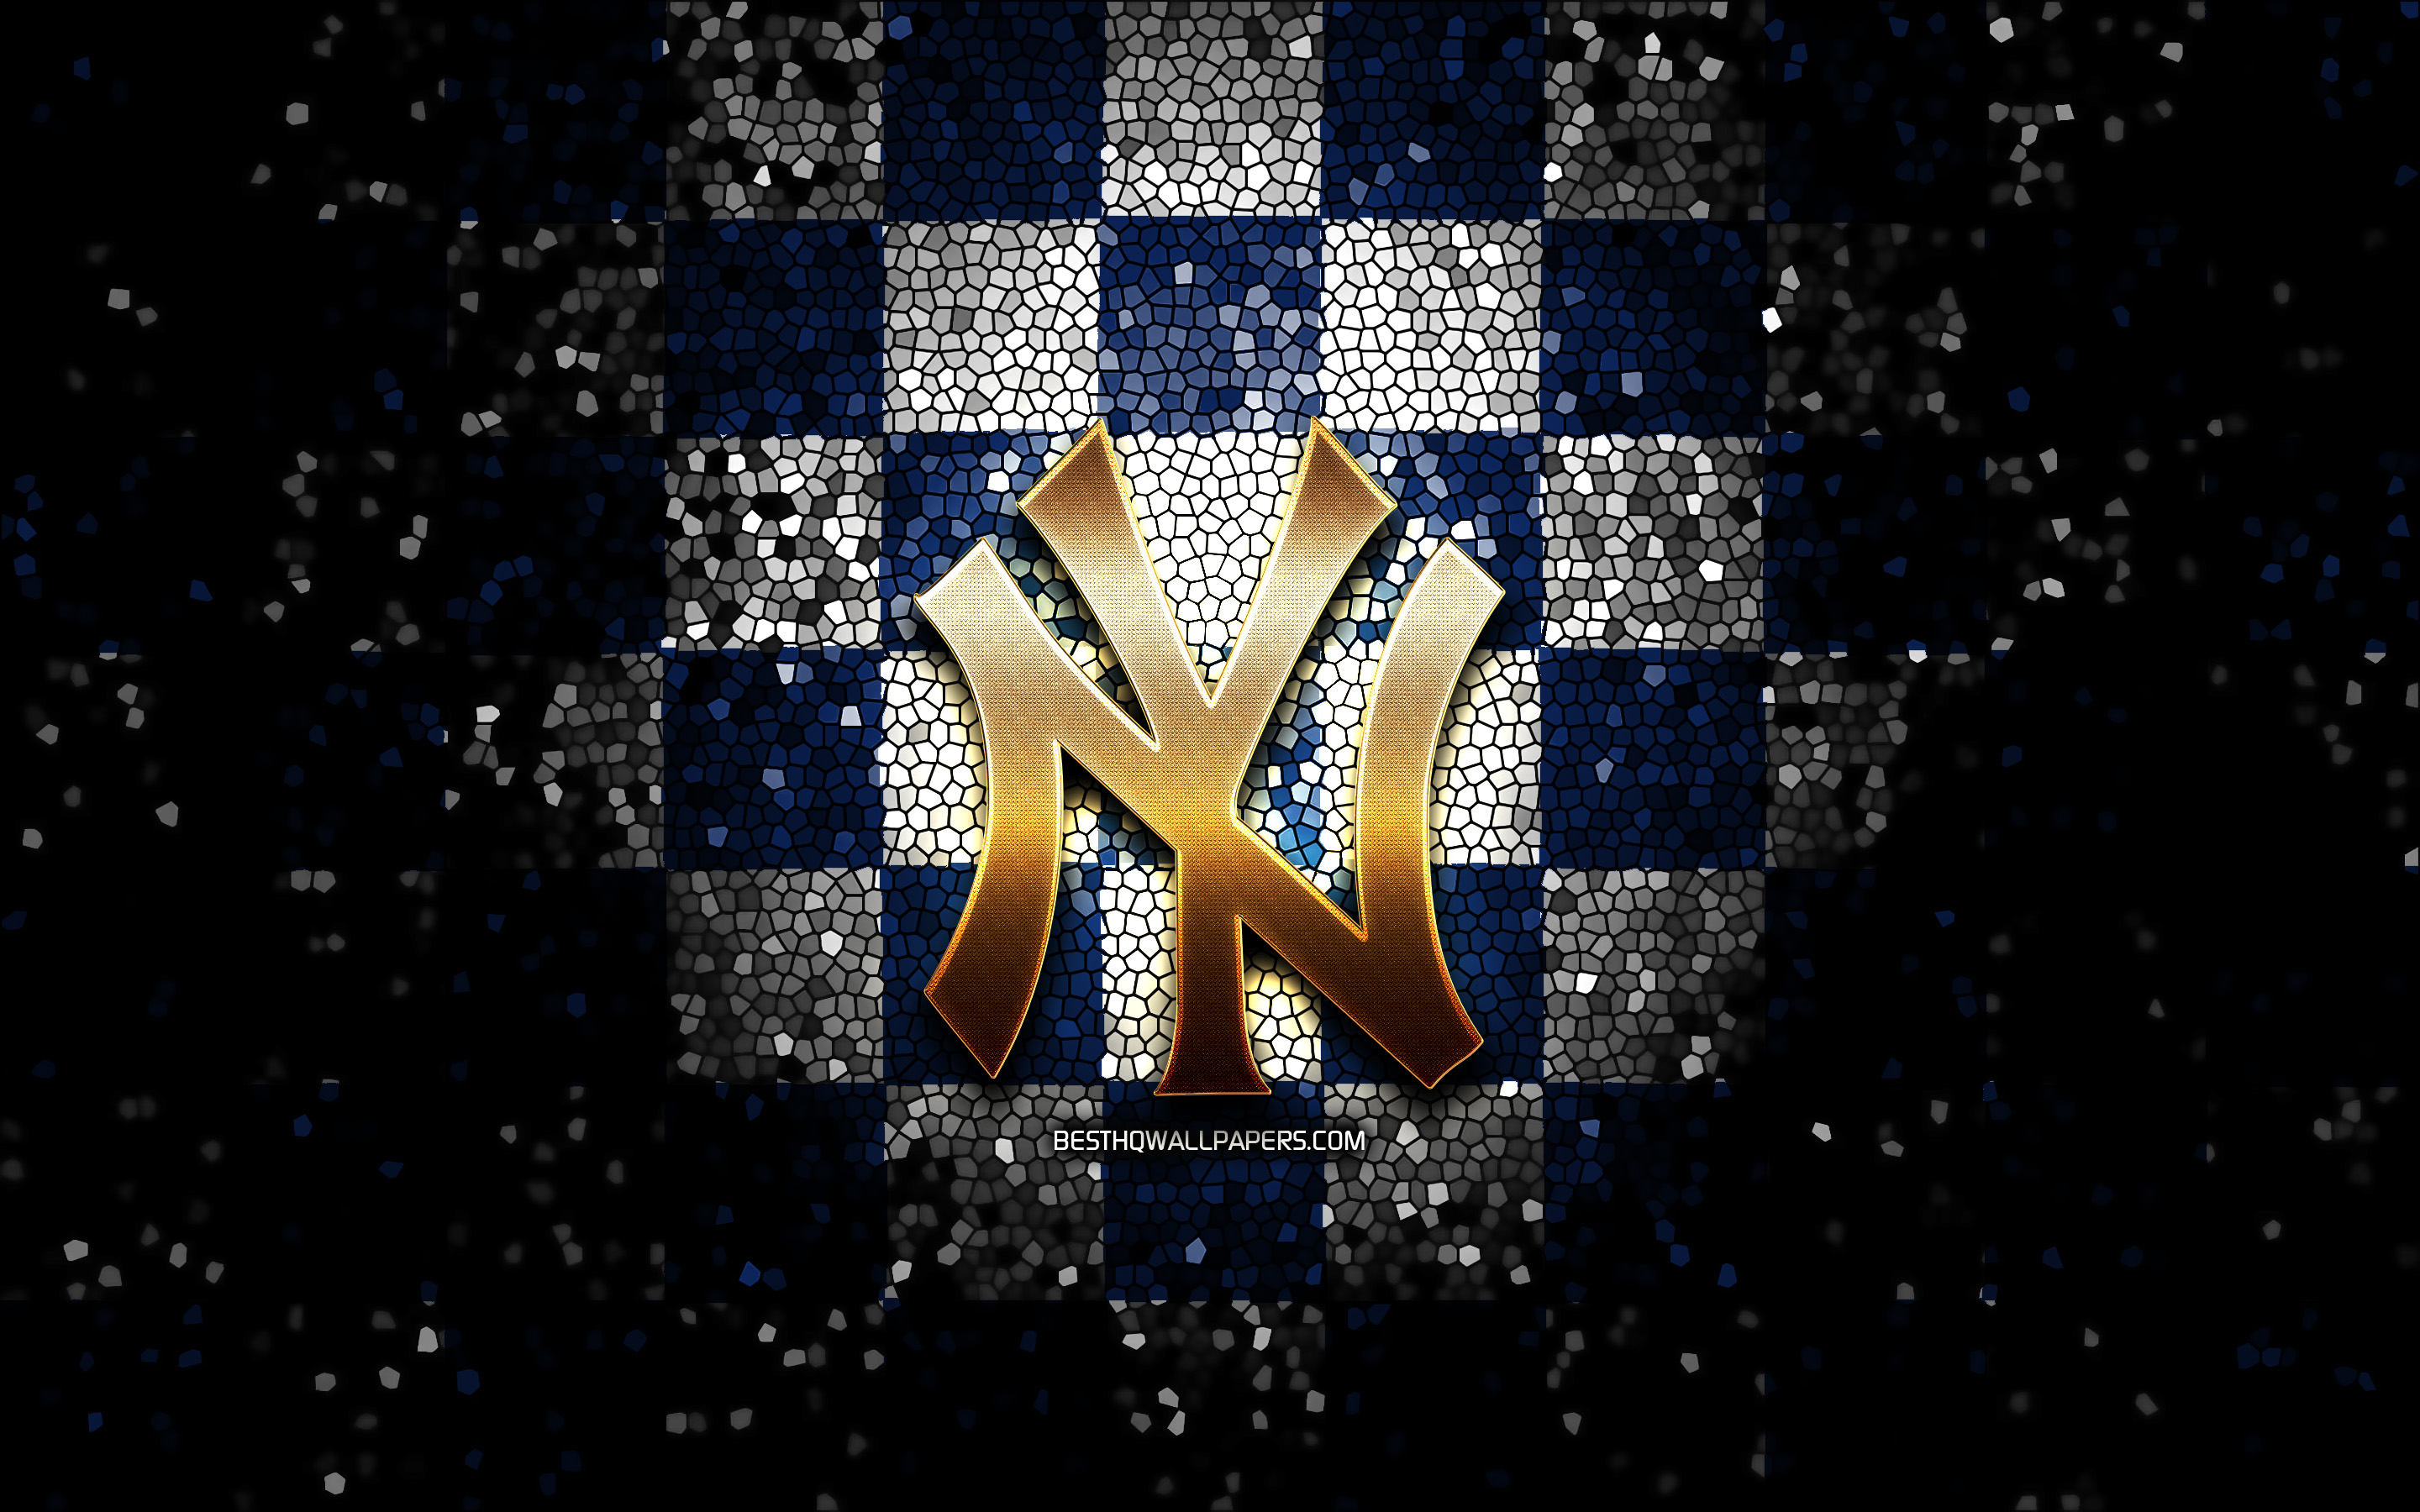 Download wallpapers New York Yankees, glitter logo, MLB, blue white  checkered background, USA, american baseball team, New York Yankees logo,  mosaic art, baseball, America, NY Yankees for desktop with resolution  2880x1800. High